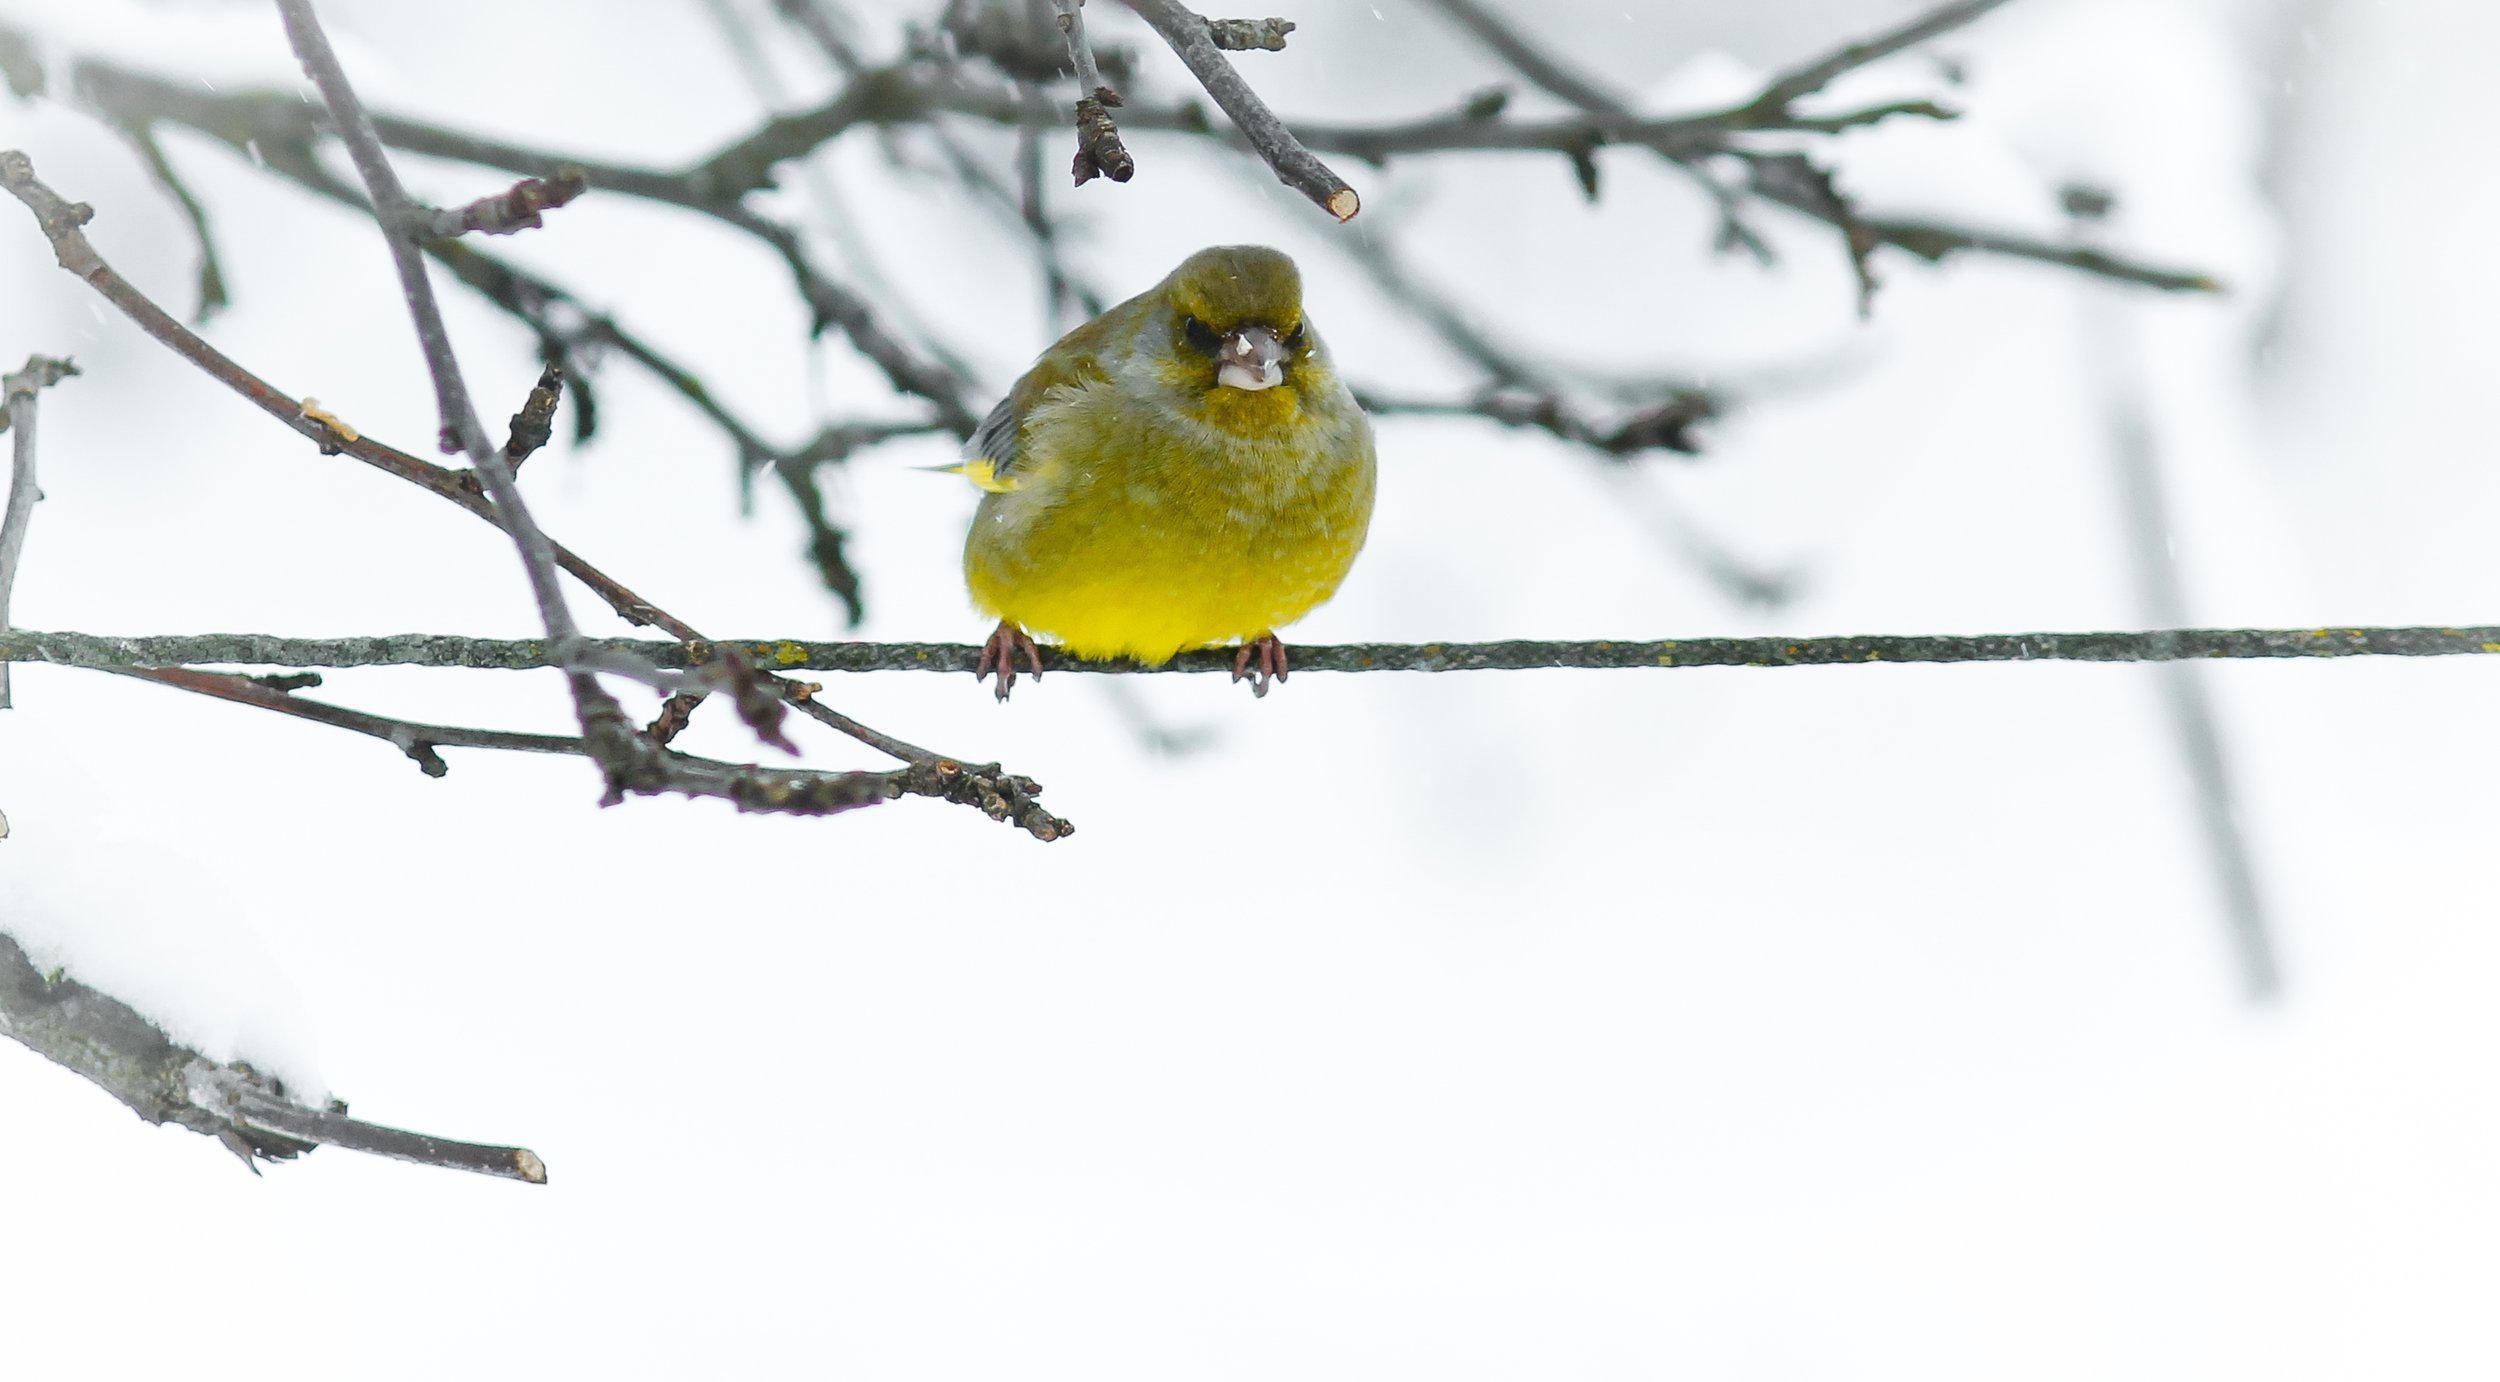 Greenfinch sitting on a rope on a winter February day in the courtyard